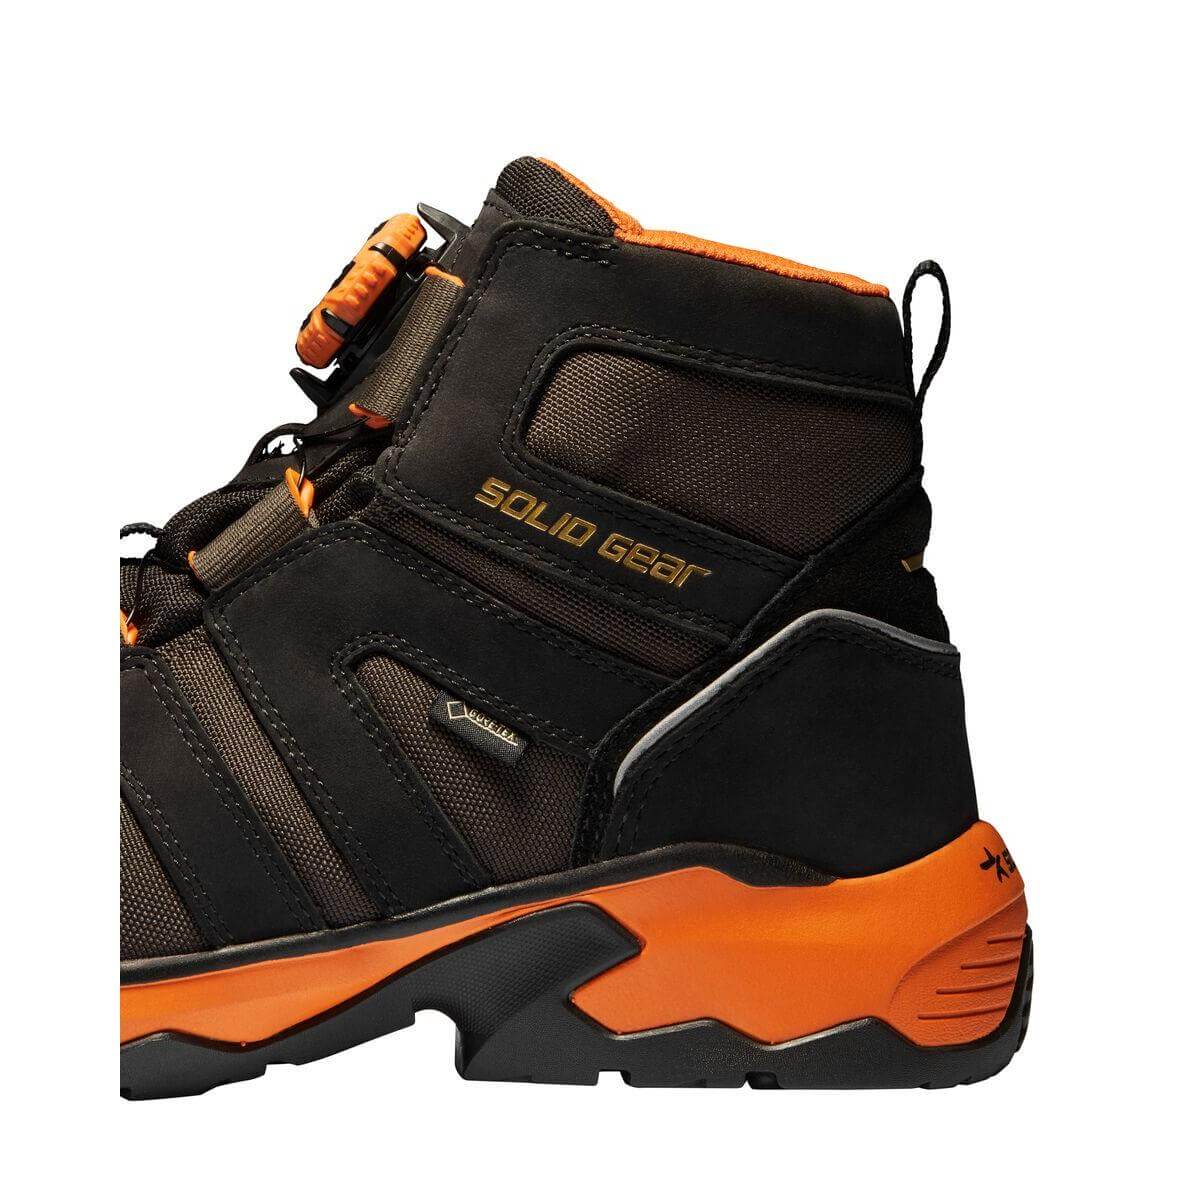 Solid Gear by Snickers 81002 Tigris GTX AG Mid Cut Wide Fit Gore Tex Waterproof S3 BOA Composite Toe Cap Safety Boots Black Orange 07 #colour_black-orange